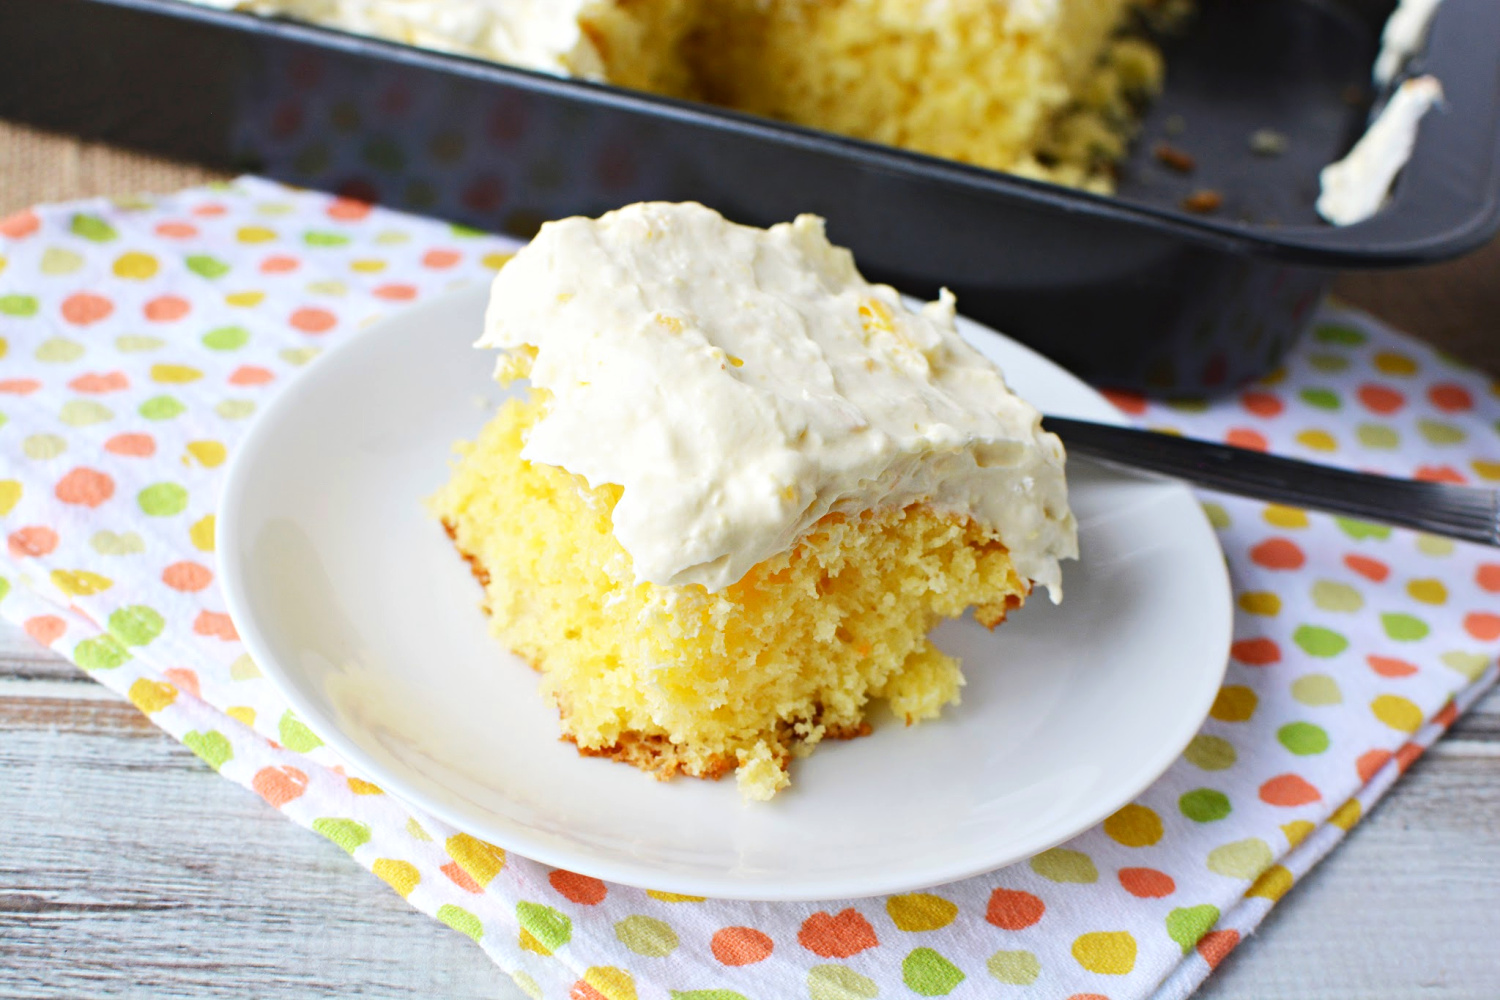 Easy Pineapple Sunshine Cake is made with whipped cream, yellow cake mix and pineapples